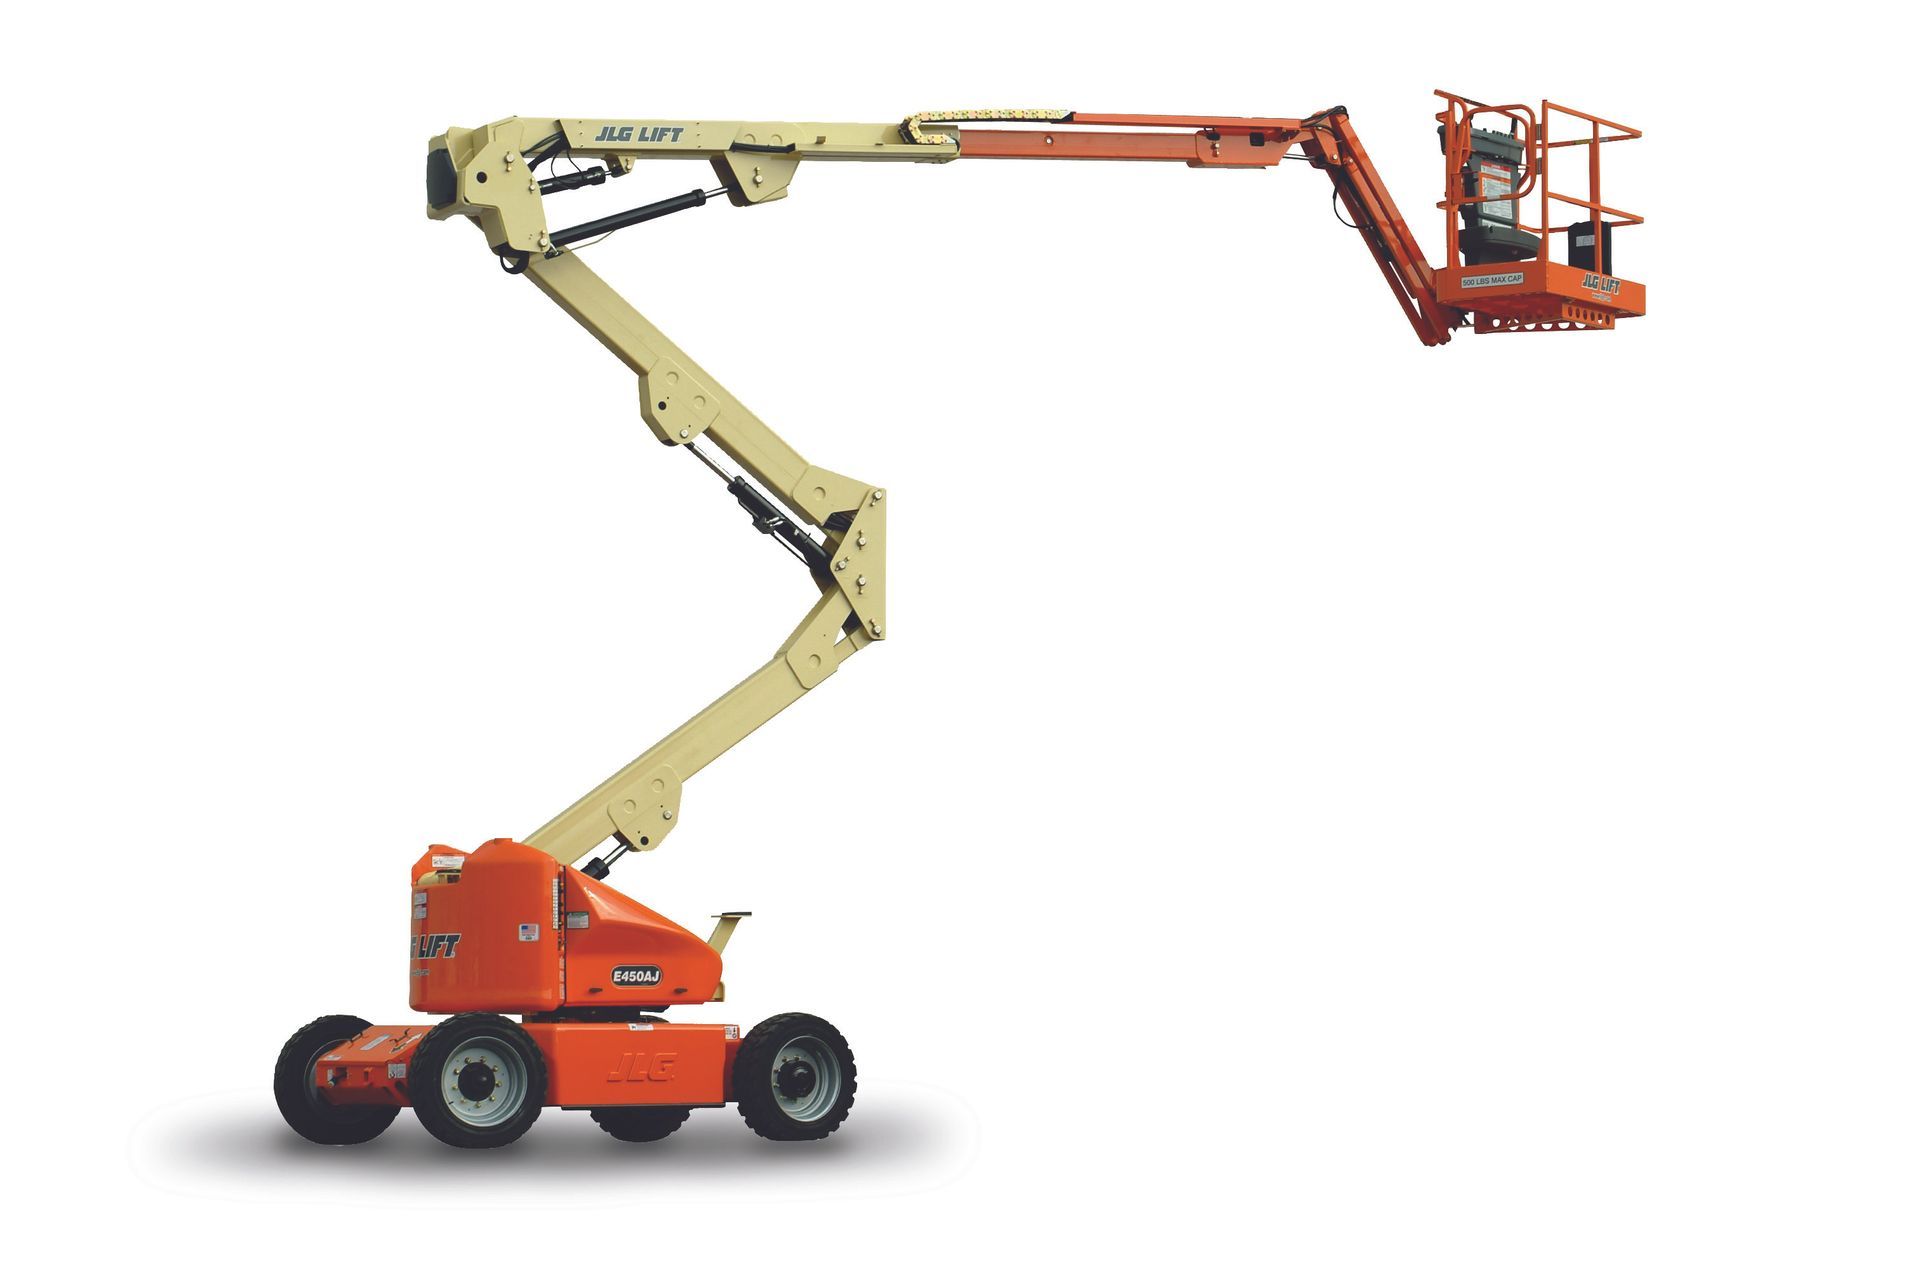 Hybrid Electric 45-Foot Articulating Boom Lift | Melbourne, Vic